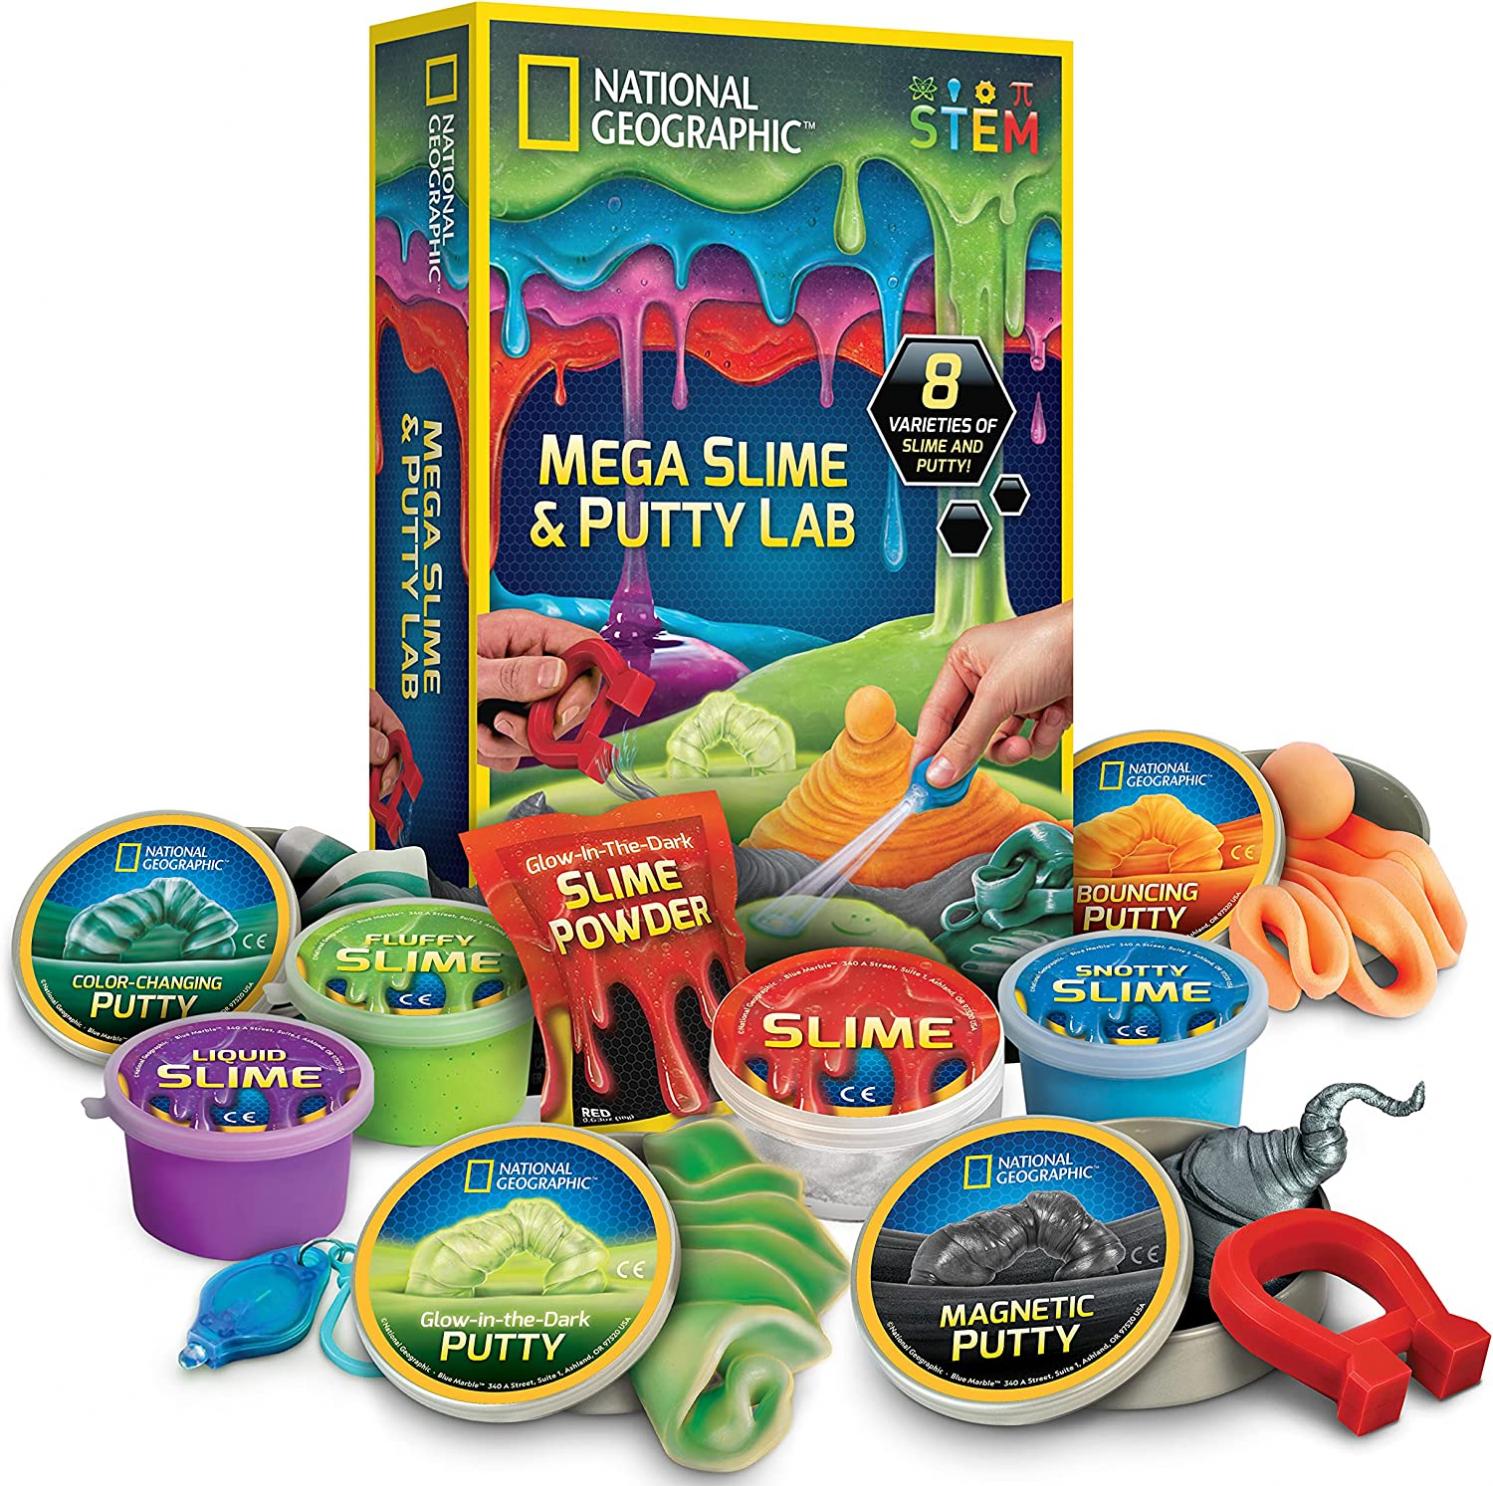 NATIONAL GEOGRAPHIC Mega Slime Kit & Putty Lab - 4 Types of Amazing Slime for Girls & Boys Plus 4 Types of Putty Including Magnetic Putty, Educational STEM Toy & Science Kit (AMAZON EXCLUSIVE)